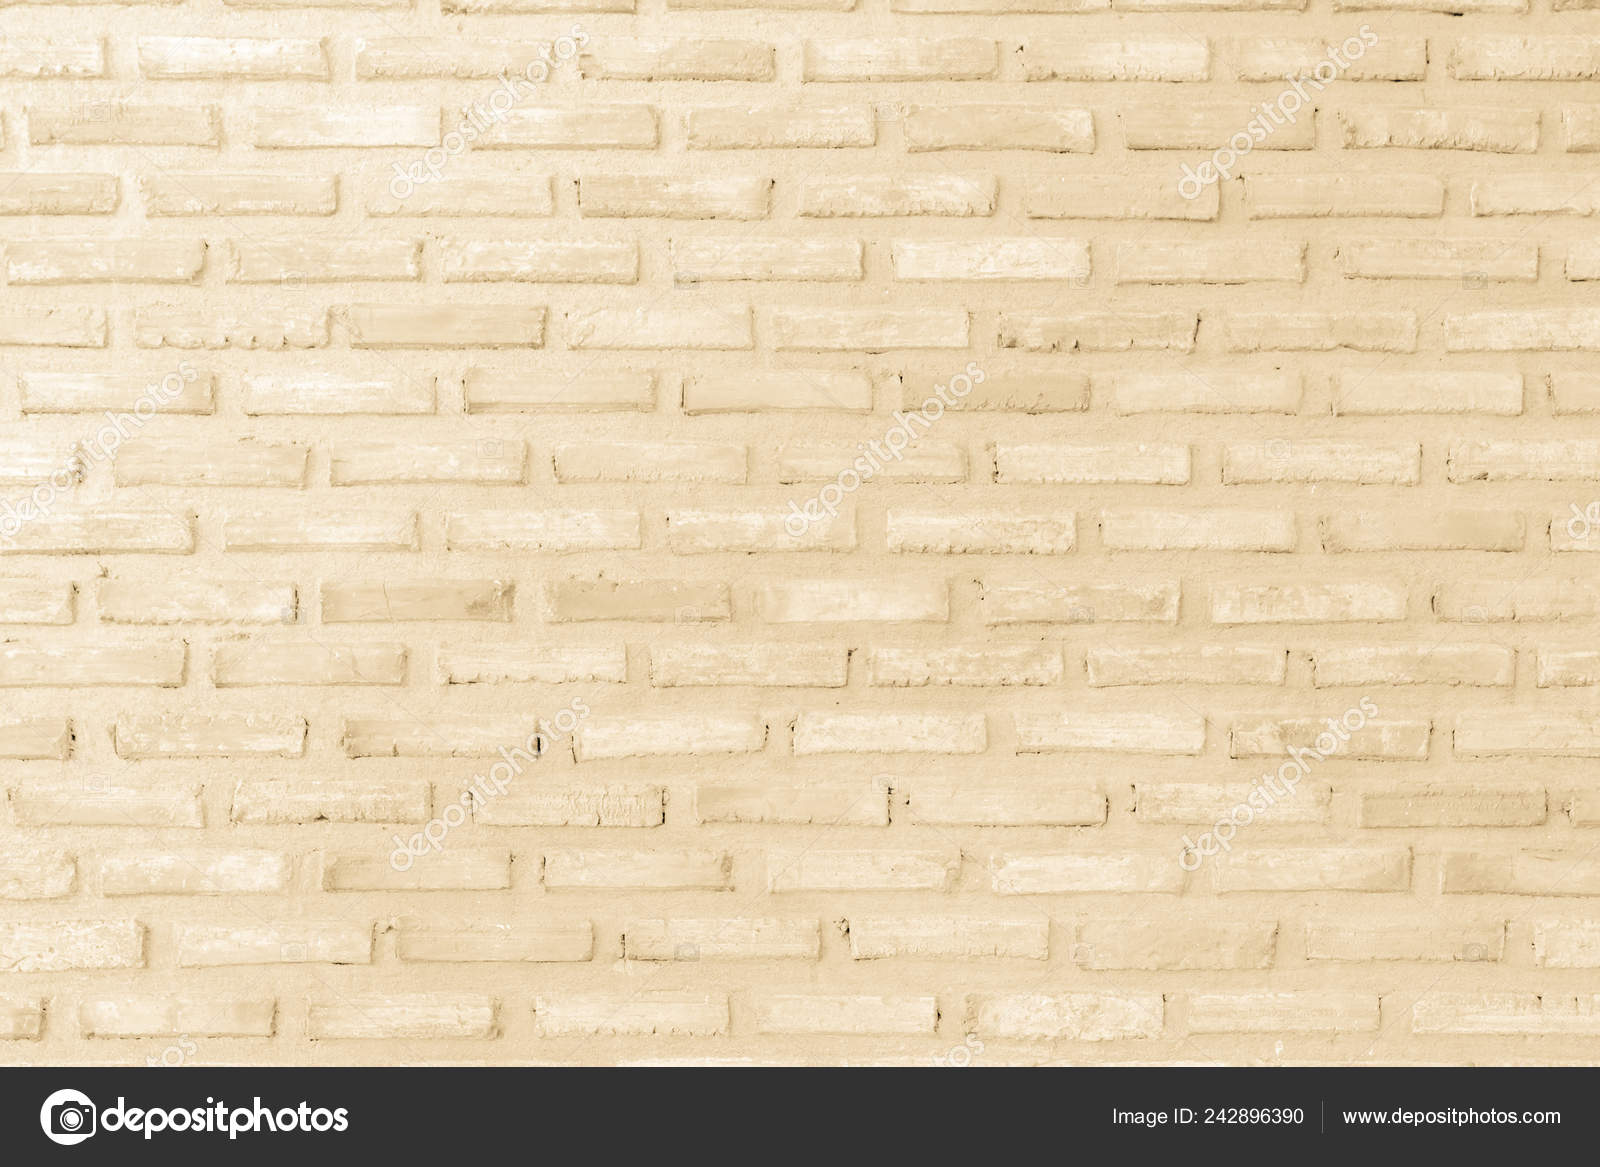 Wall Stained Old Grungy Stucco Texture Background Brickwork